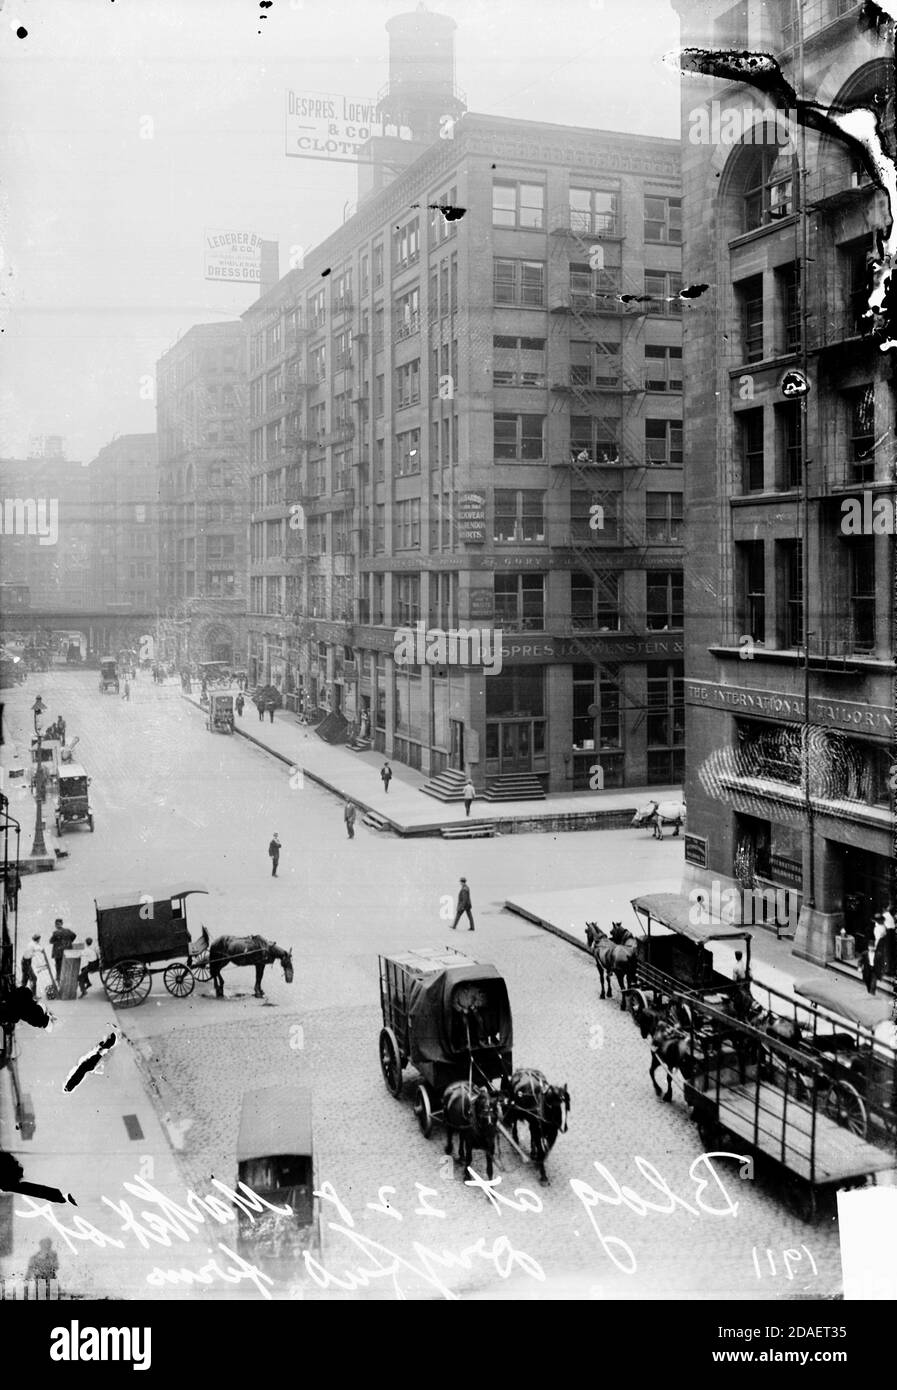 Building at 228 Market Street, viewed from across Market Street with various horse drawn vehicles on the street in the foreground. Stock Photo